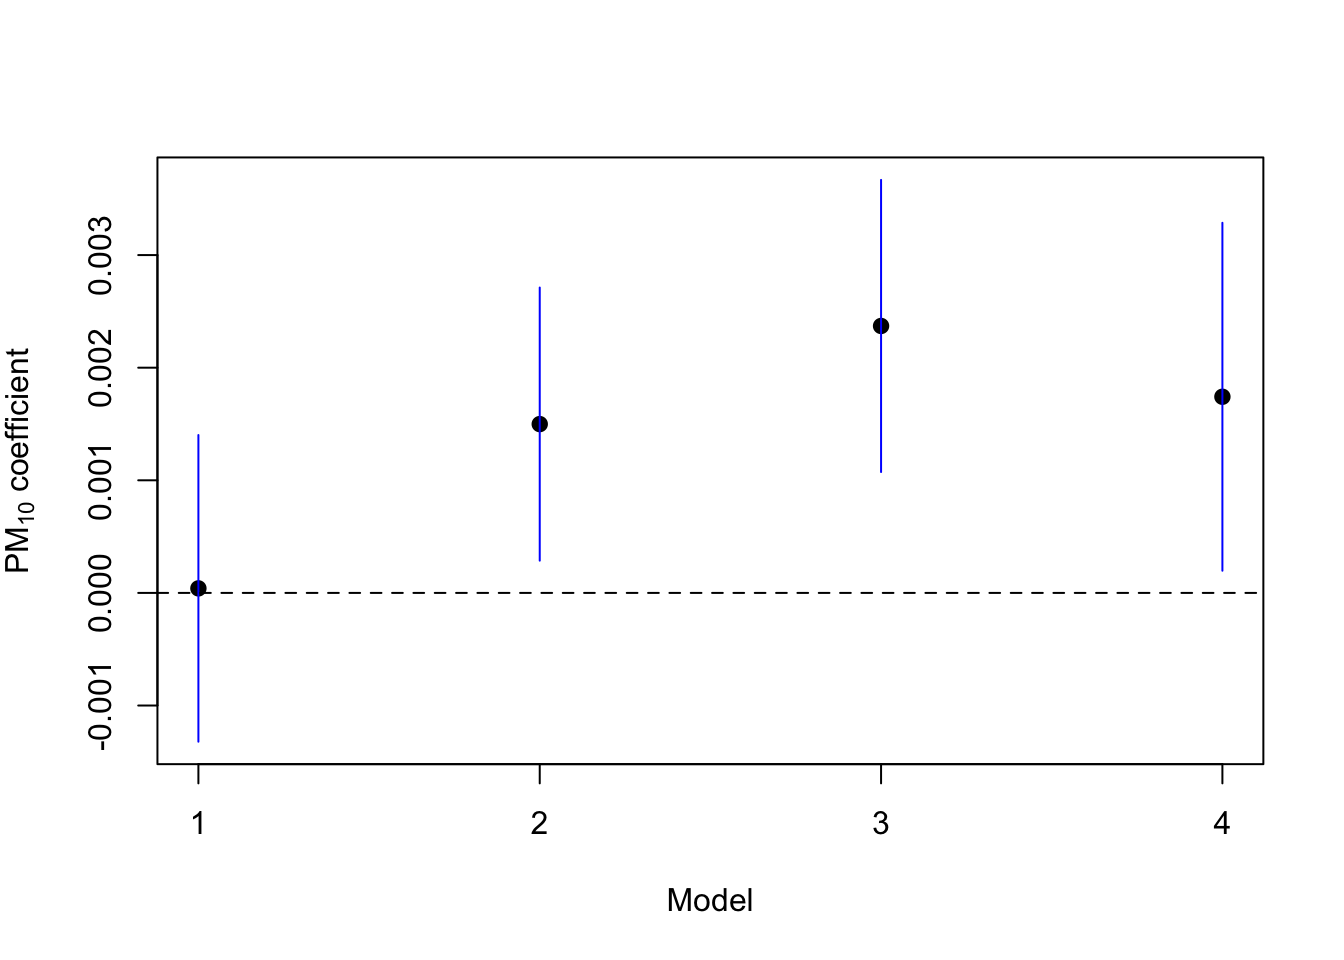 Association Between PM10 and Mortality Under Different Models